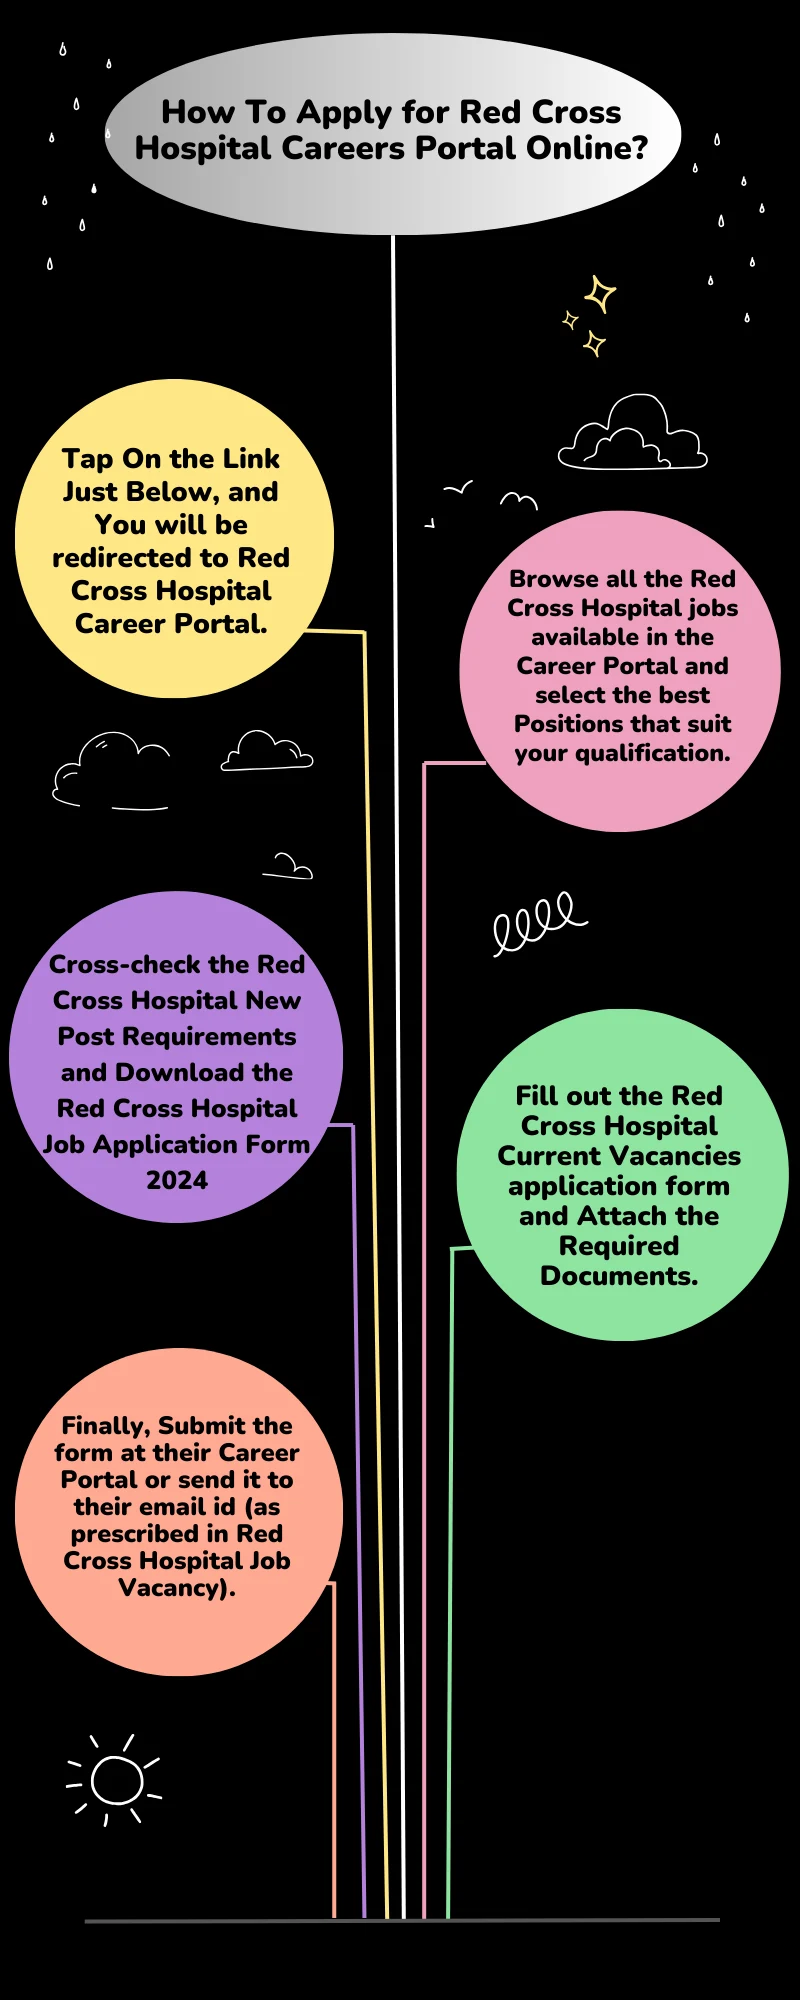 How To Apply for Red Cross Hospital Careers Portal Online?